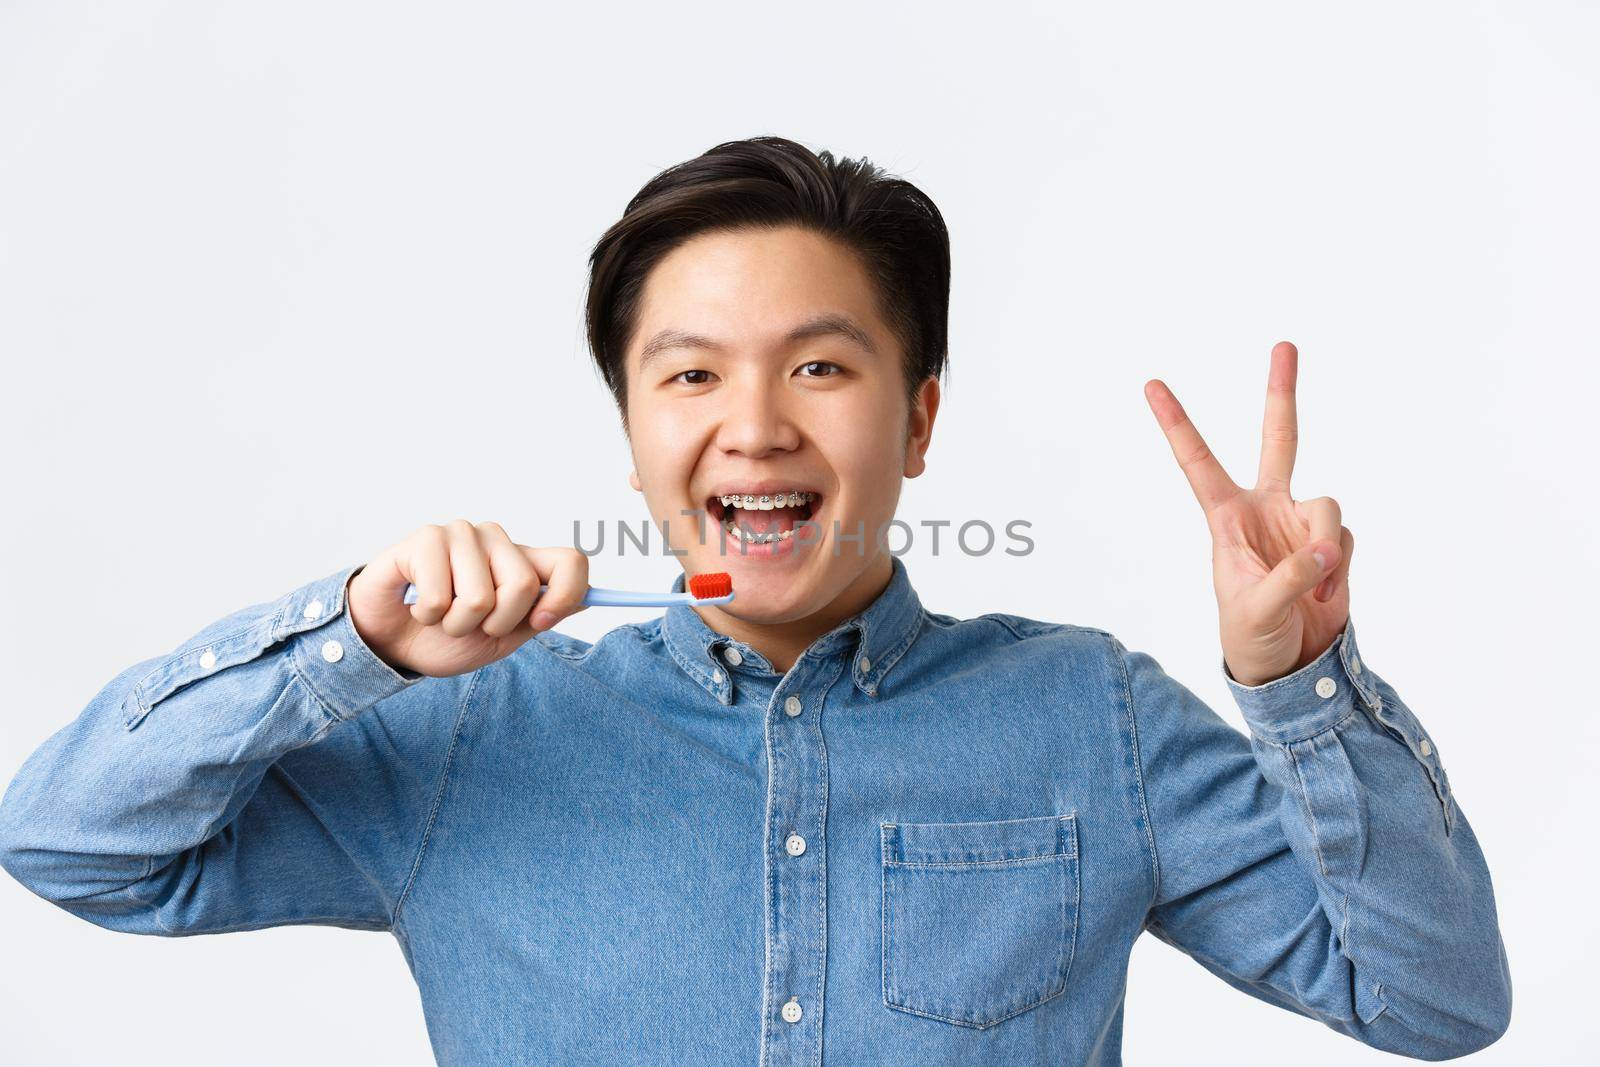 Orthodontics, dental care and hygiene concept. Close-up of happy cute asian man with braces, brushing teeth and smiling, showing peace sign, holding toothbrush, standing white background.